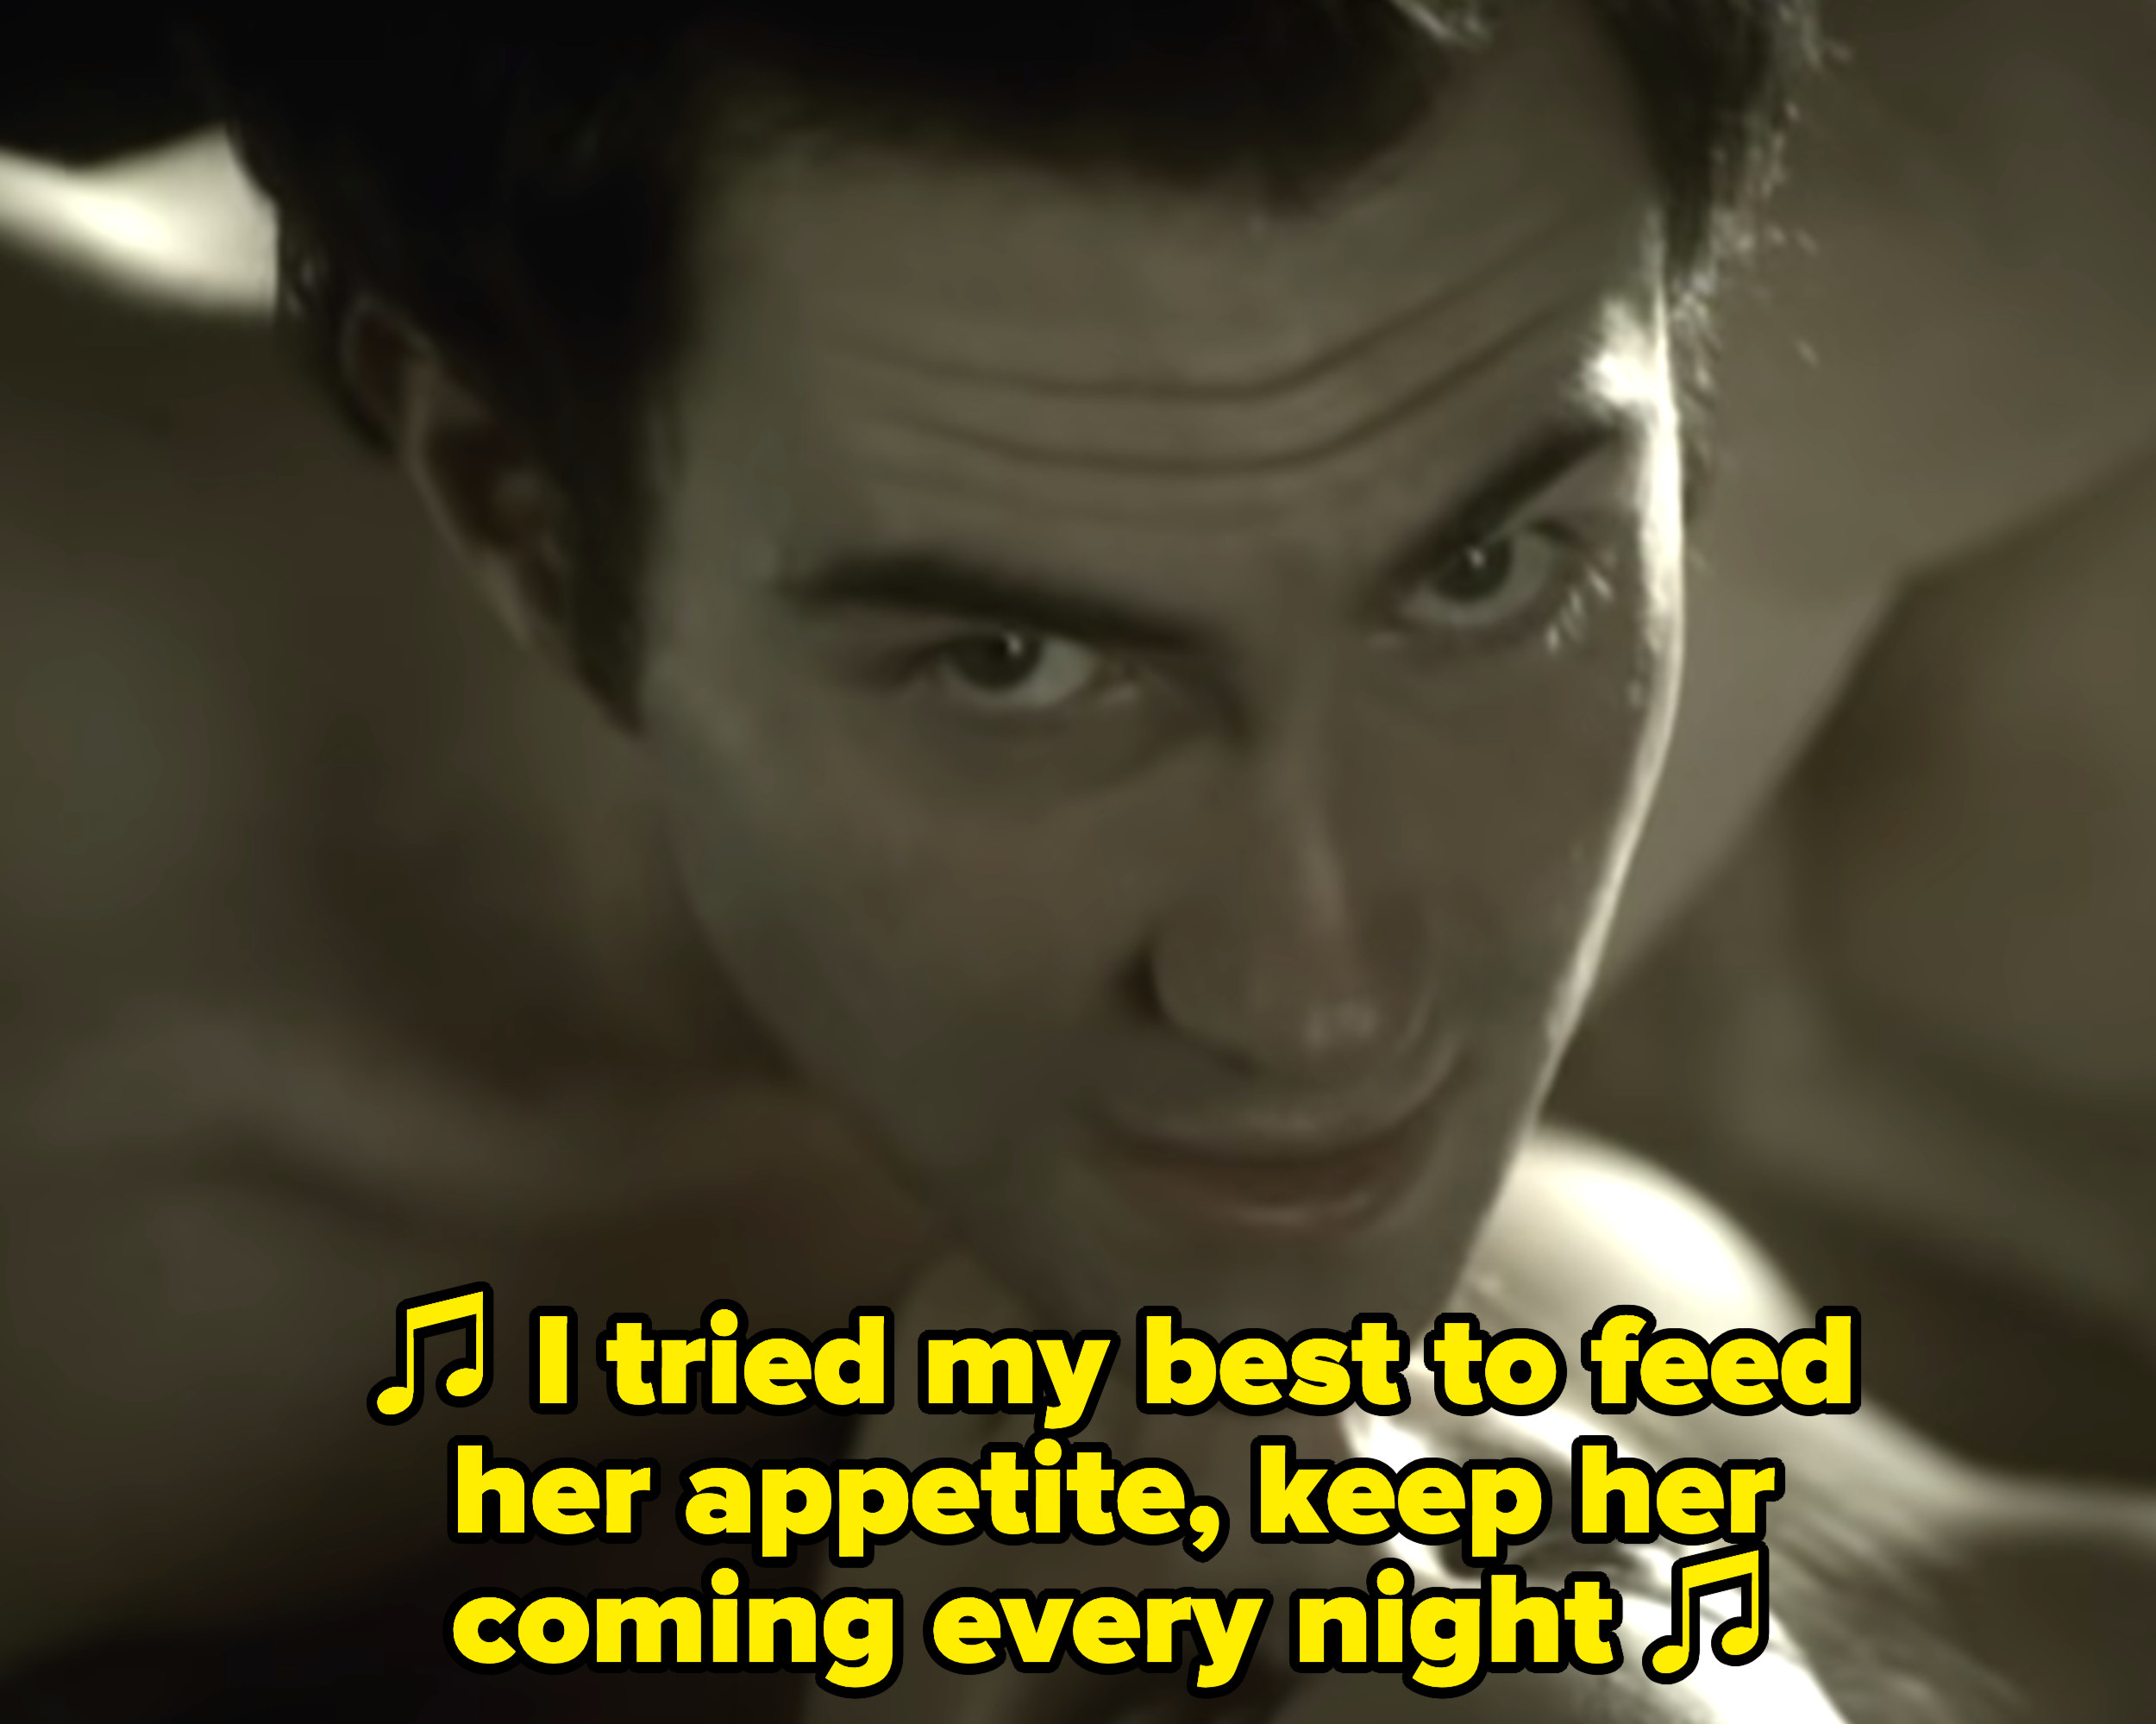 Adam Levine singing: &quot;I tried my best to feed her appetite, keep her coming every night&quot;